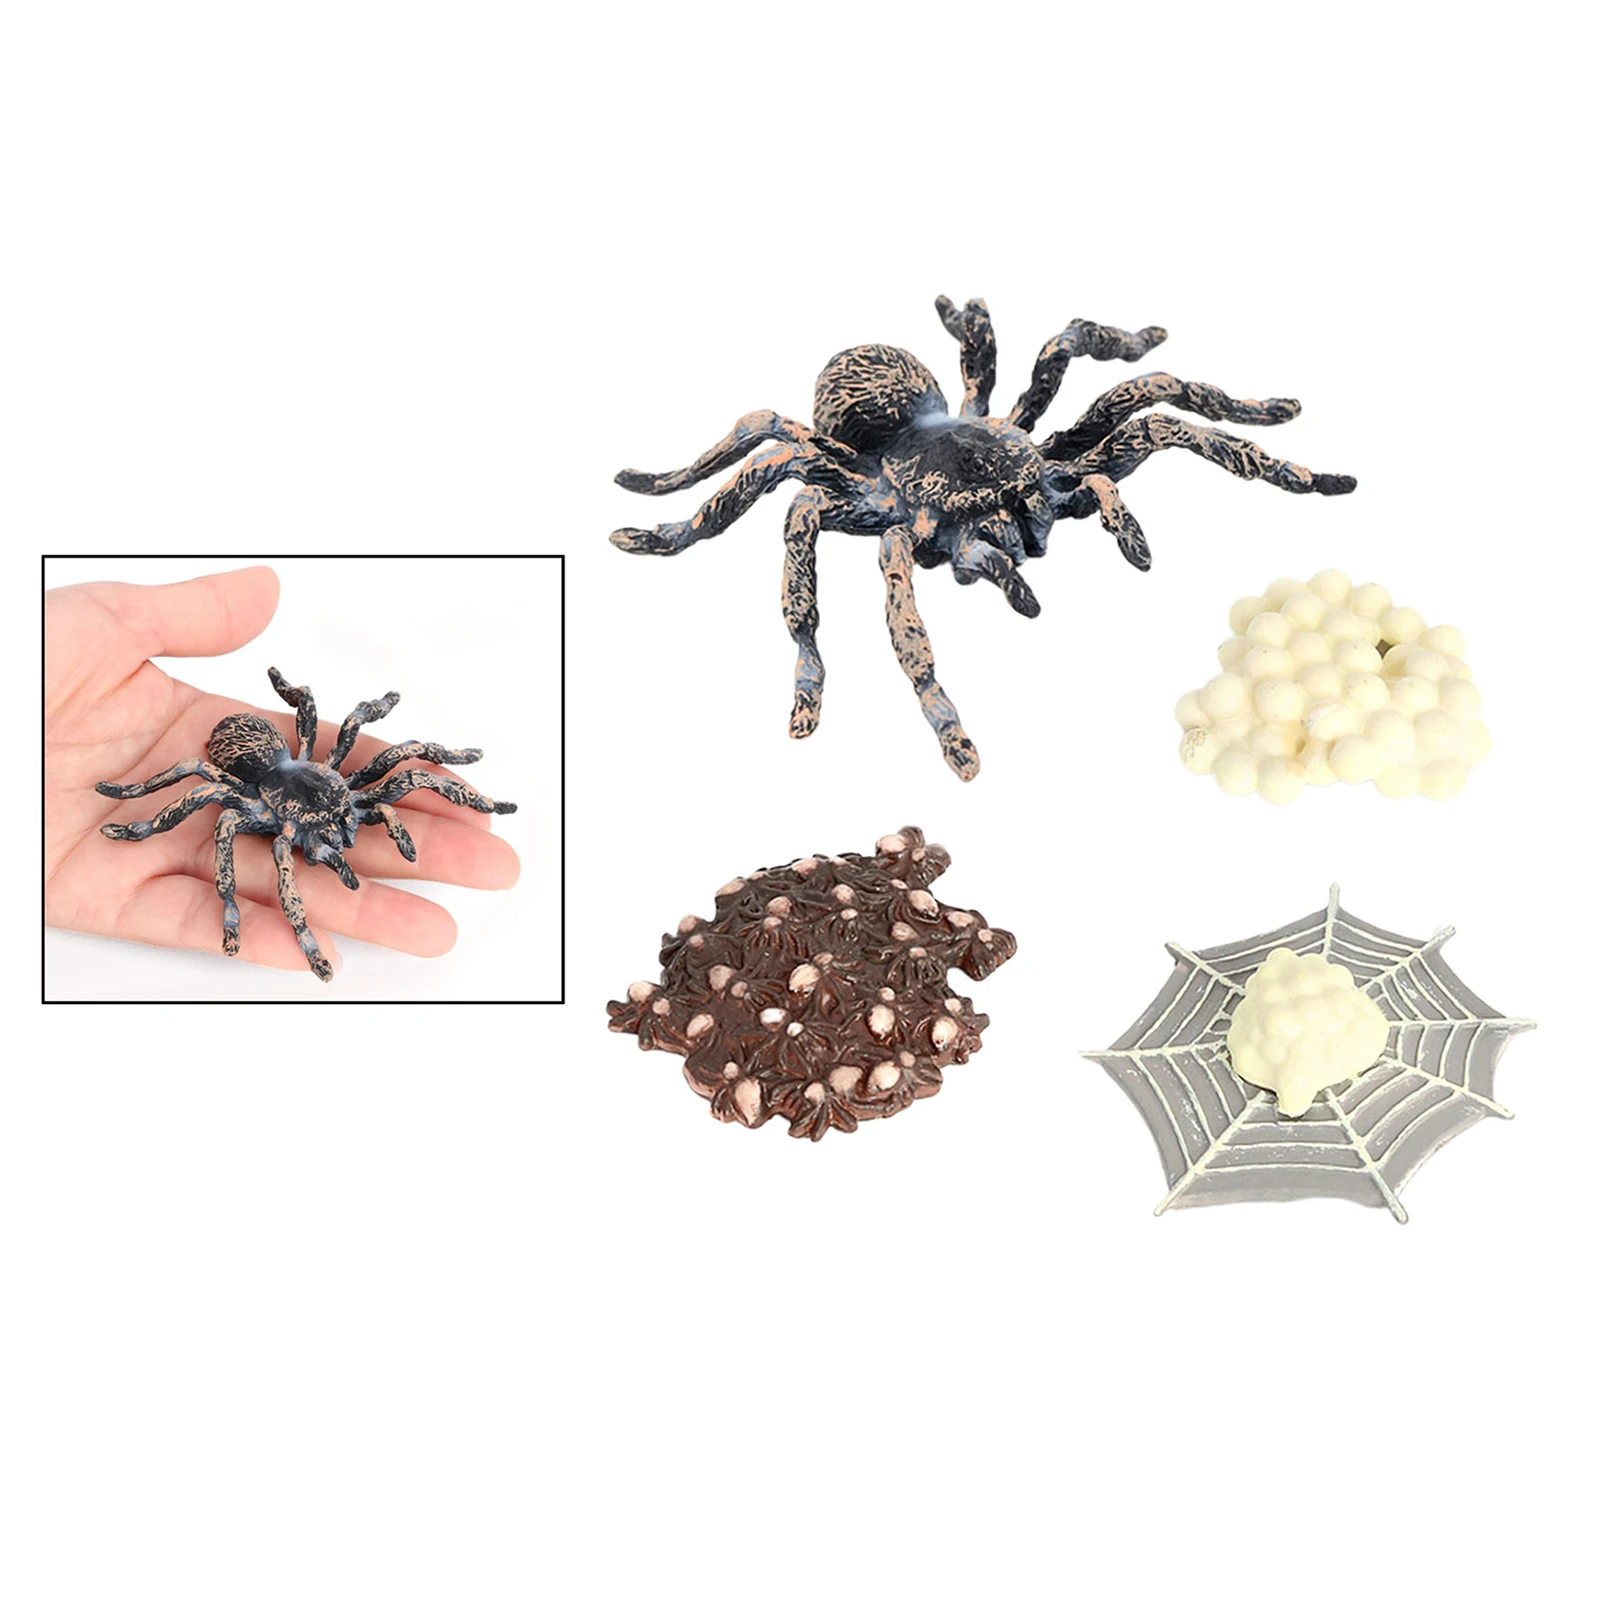 Life Cycle of A Giant Whiteknee Spider, Nature Insect Life Cycles